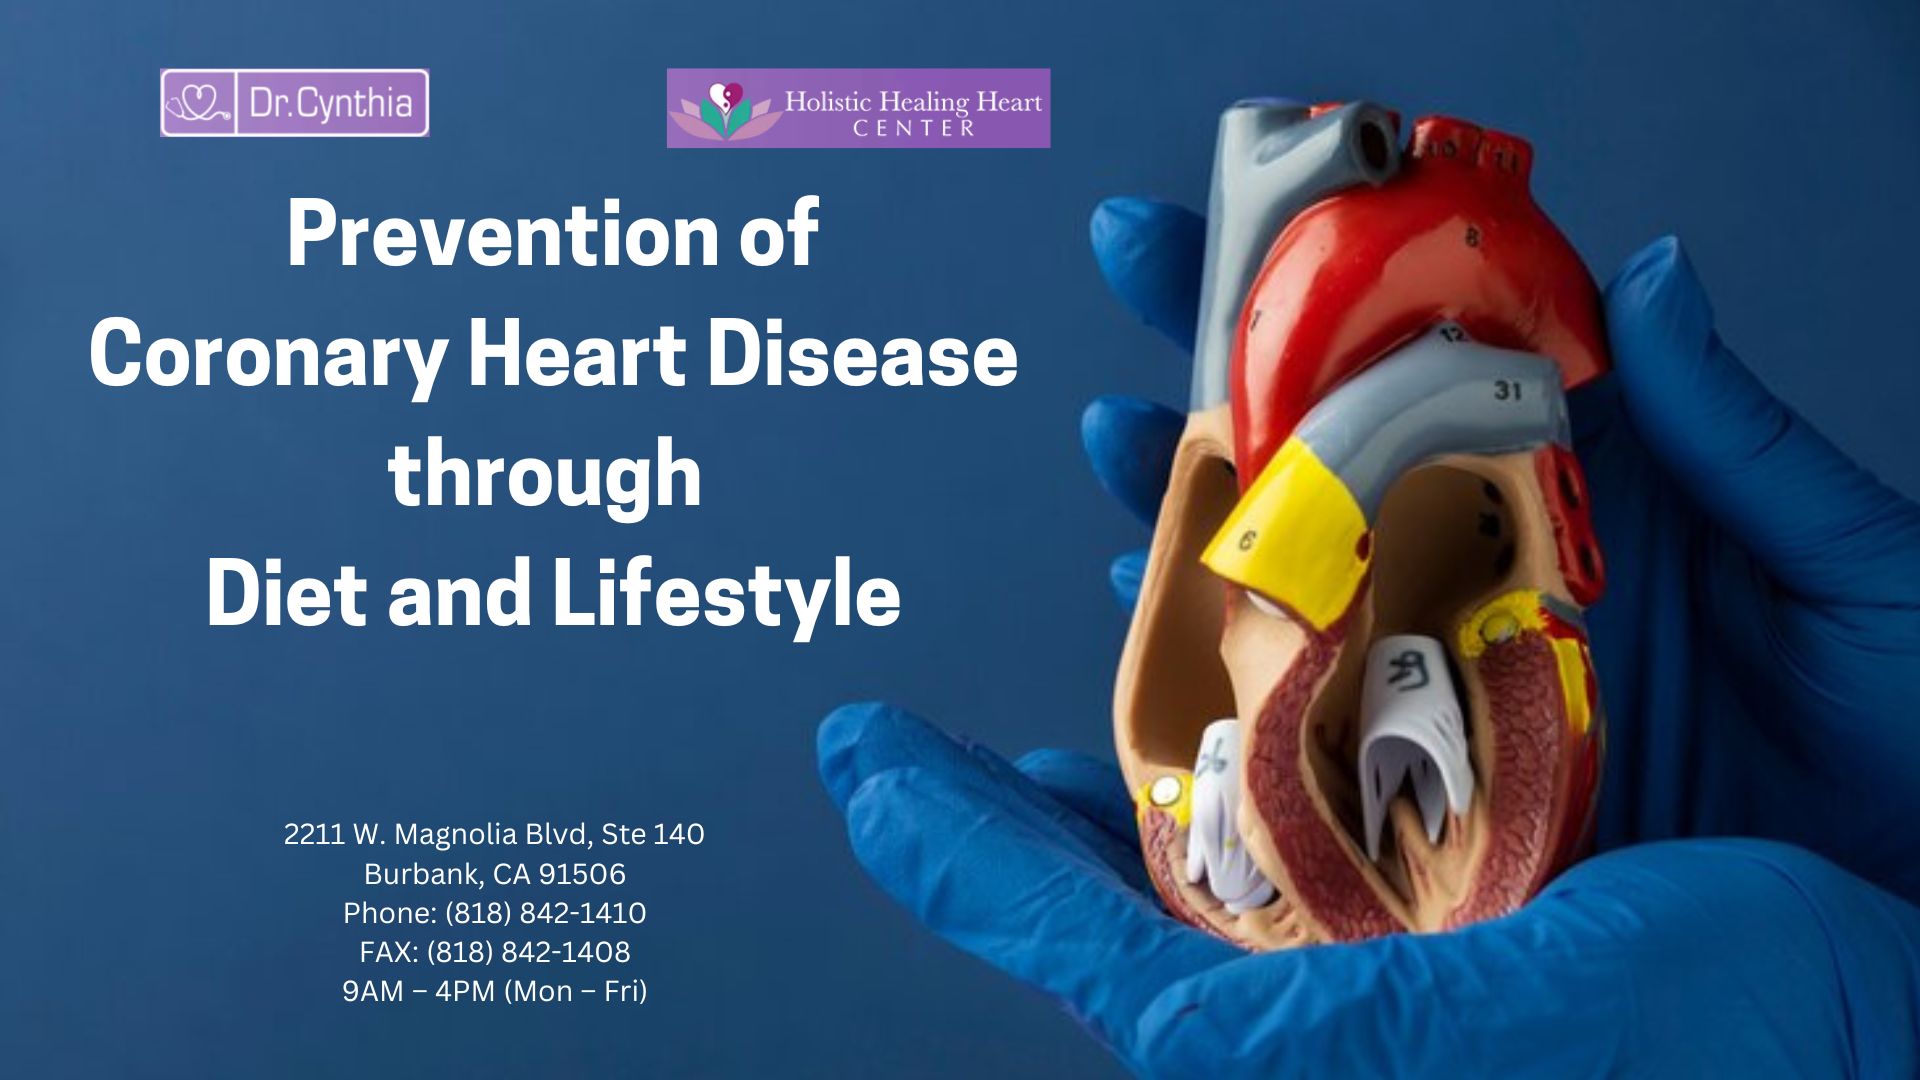 Prevention of Coronary Heart Disease through Diet and Lifestyle